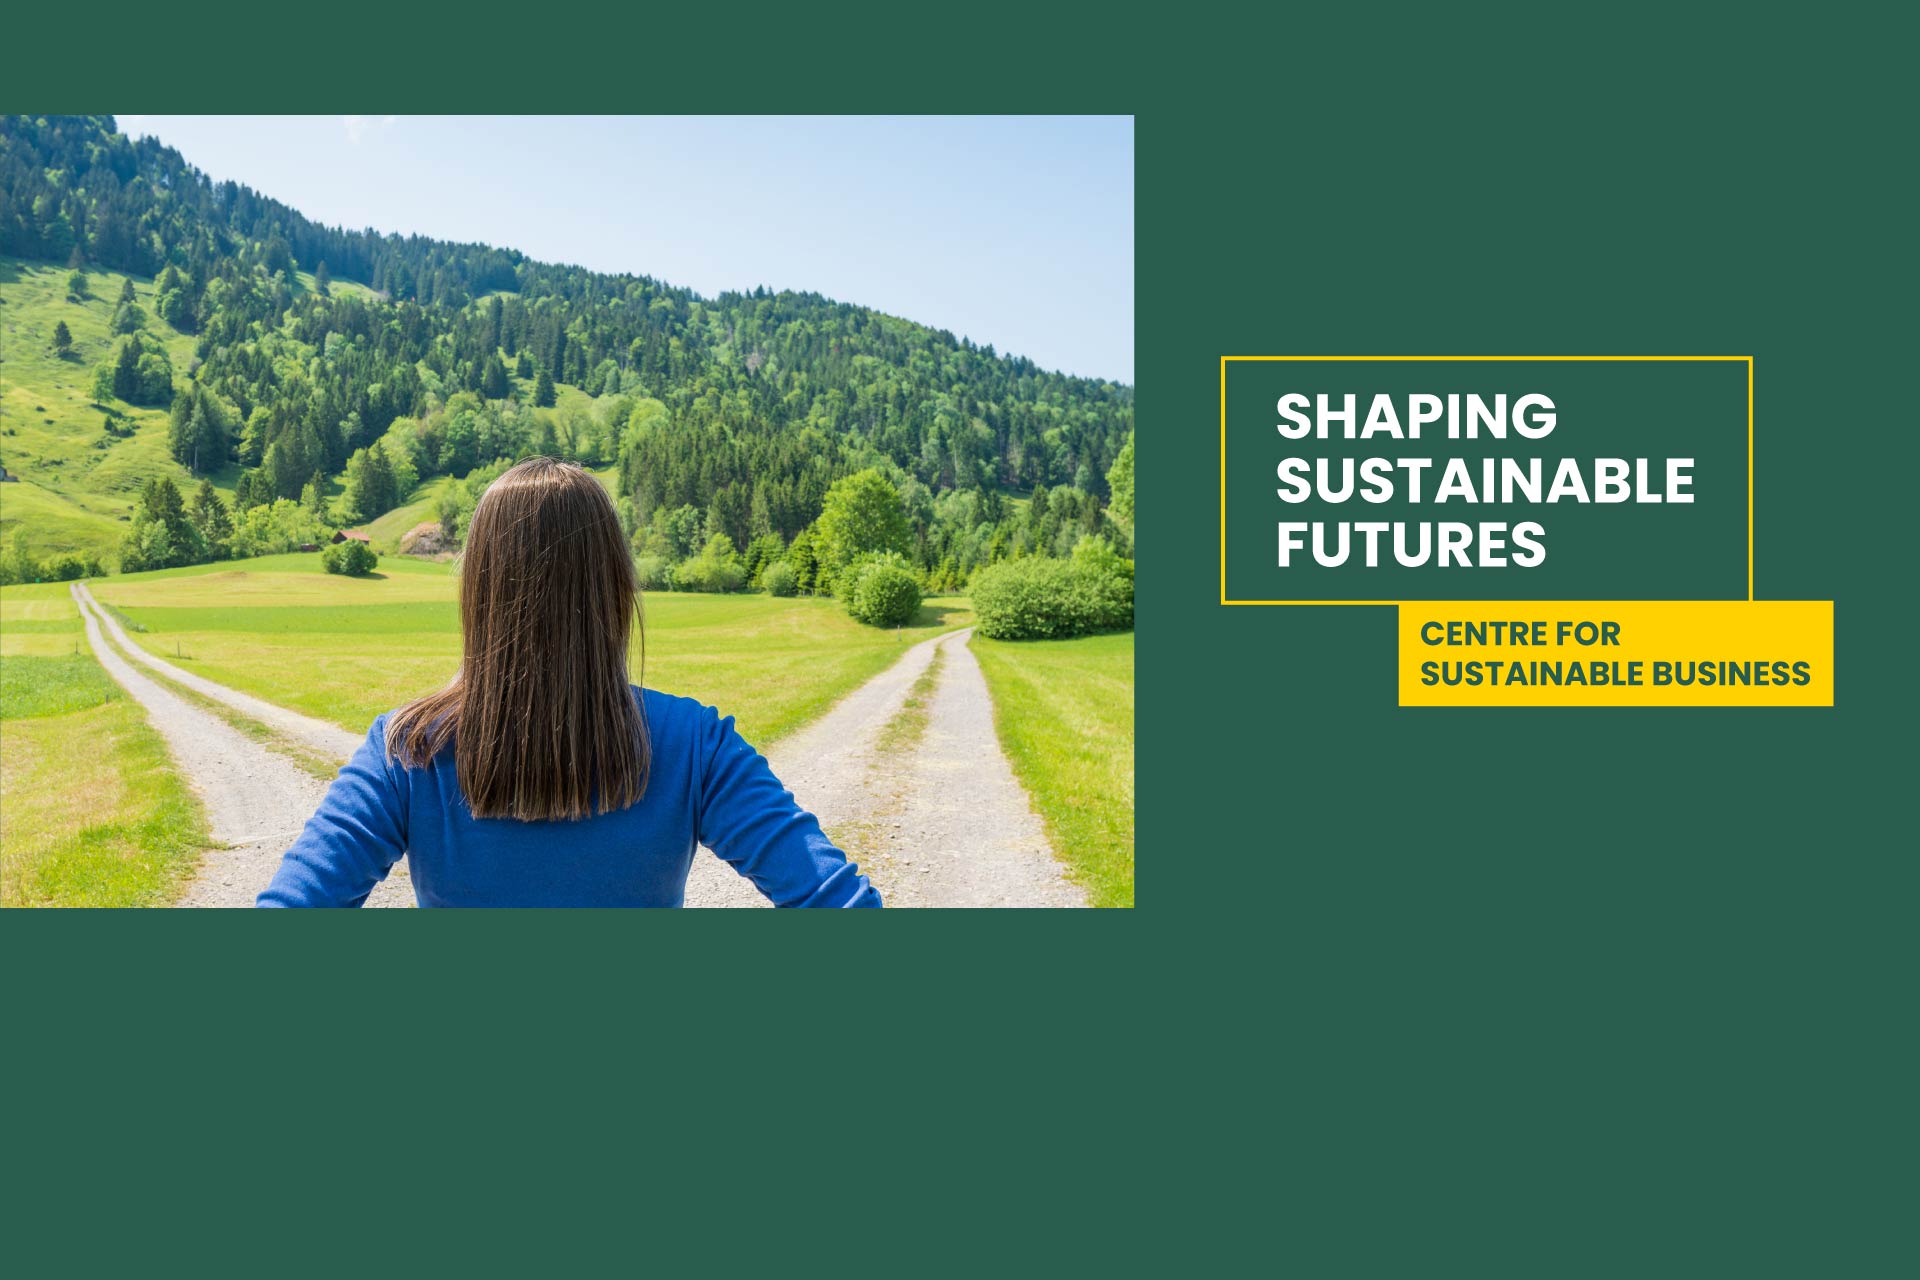 Shaping Sustainable Futures programme